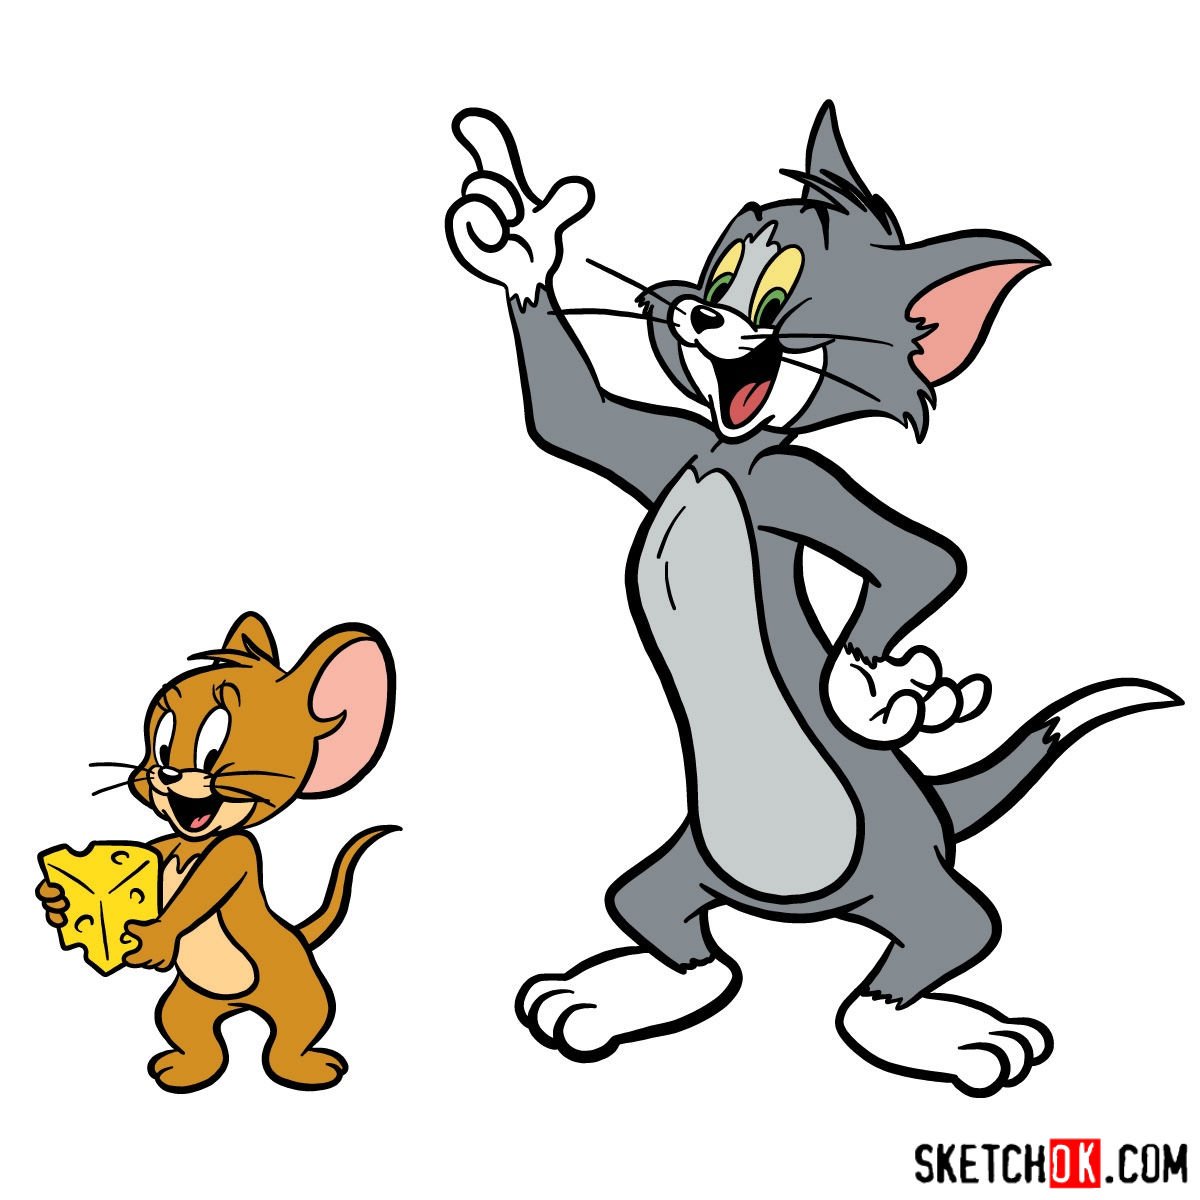 How to draw Tom and Jerry together